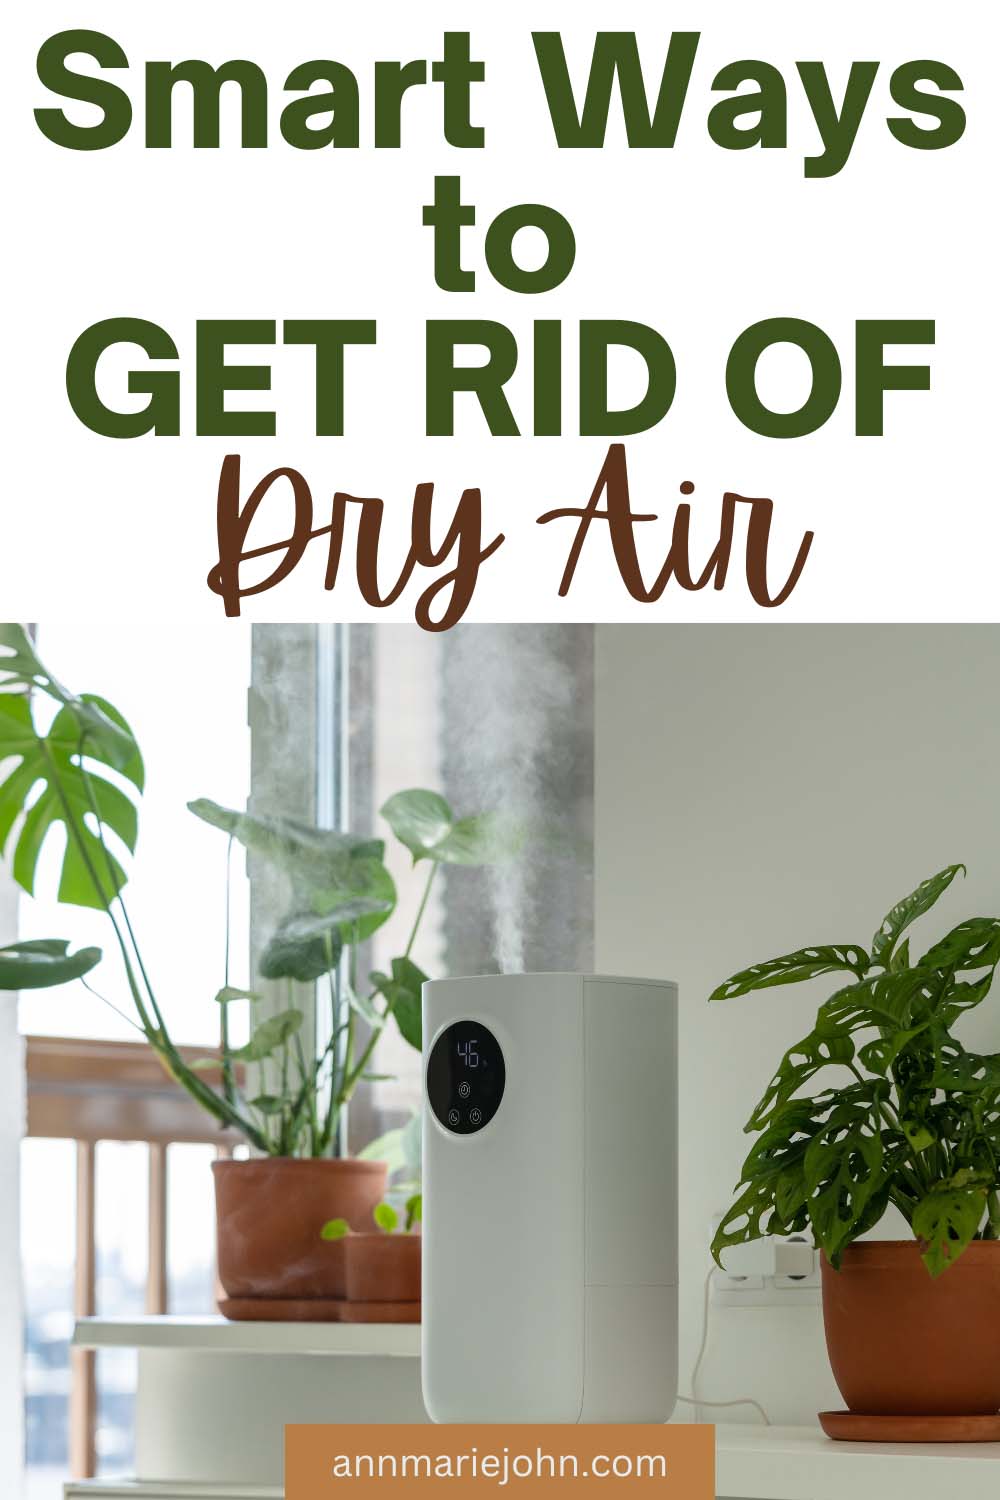 Smart Ways to Get Rid of Dry Air